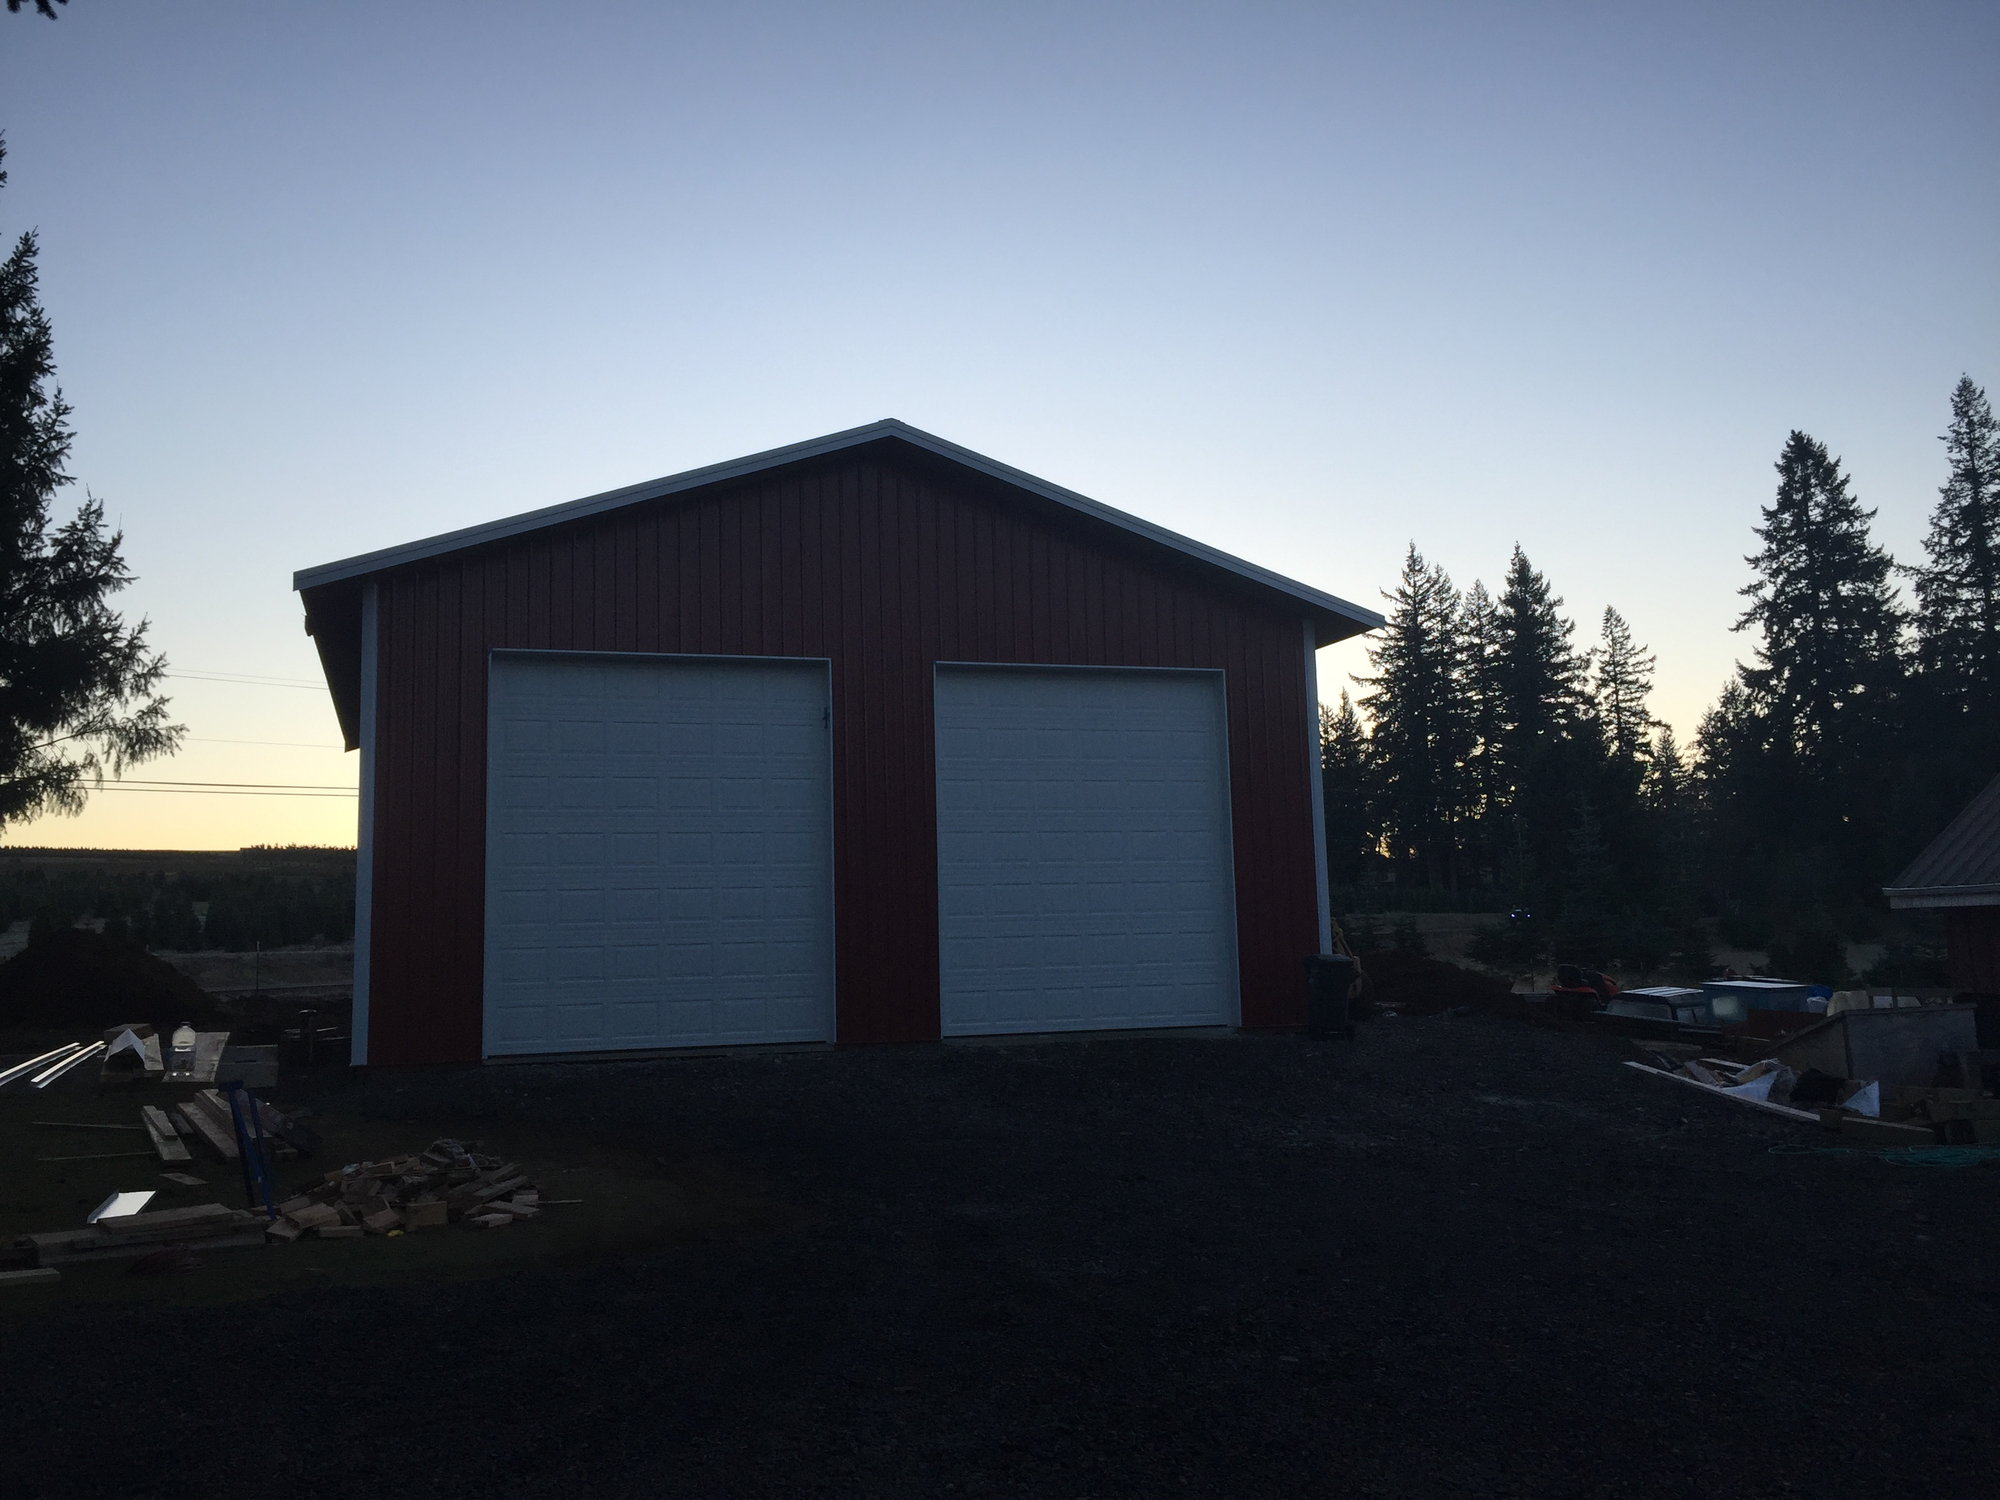 New Pole Barn / Boat Shed - Page 2 - The Hull Truth - Boating and